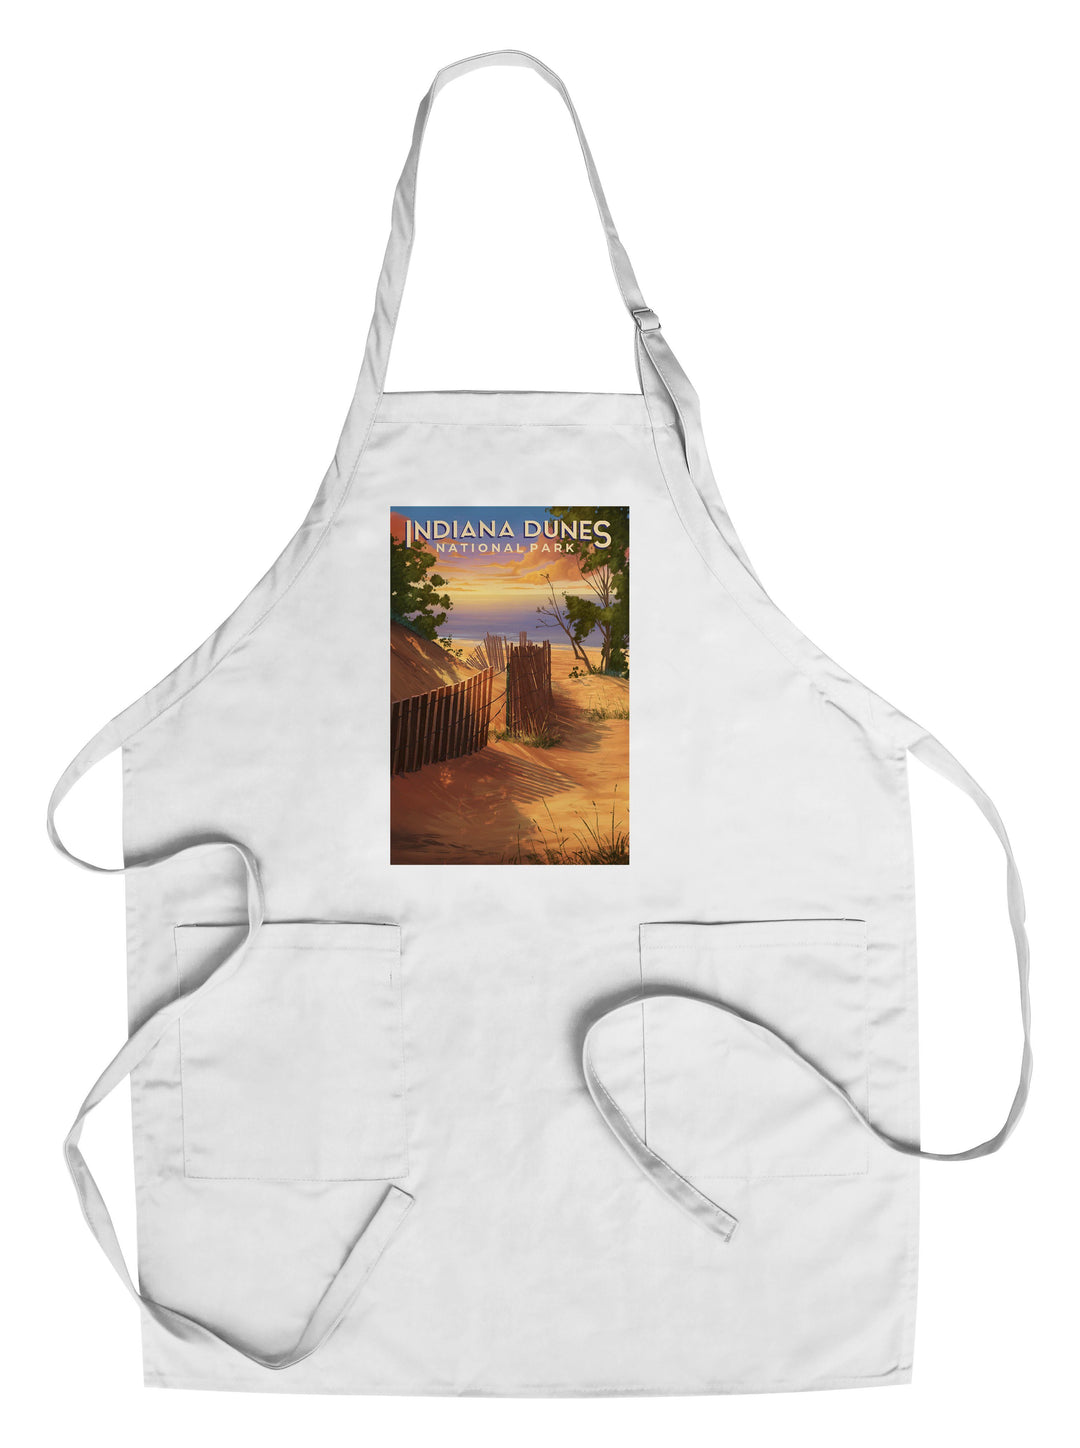 Indiana Dunes National Park, Indiana, Oil Painting, Lantern Press Artwork, Towels and Aprons Kitchen Lantern Press Chef's Apron 